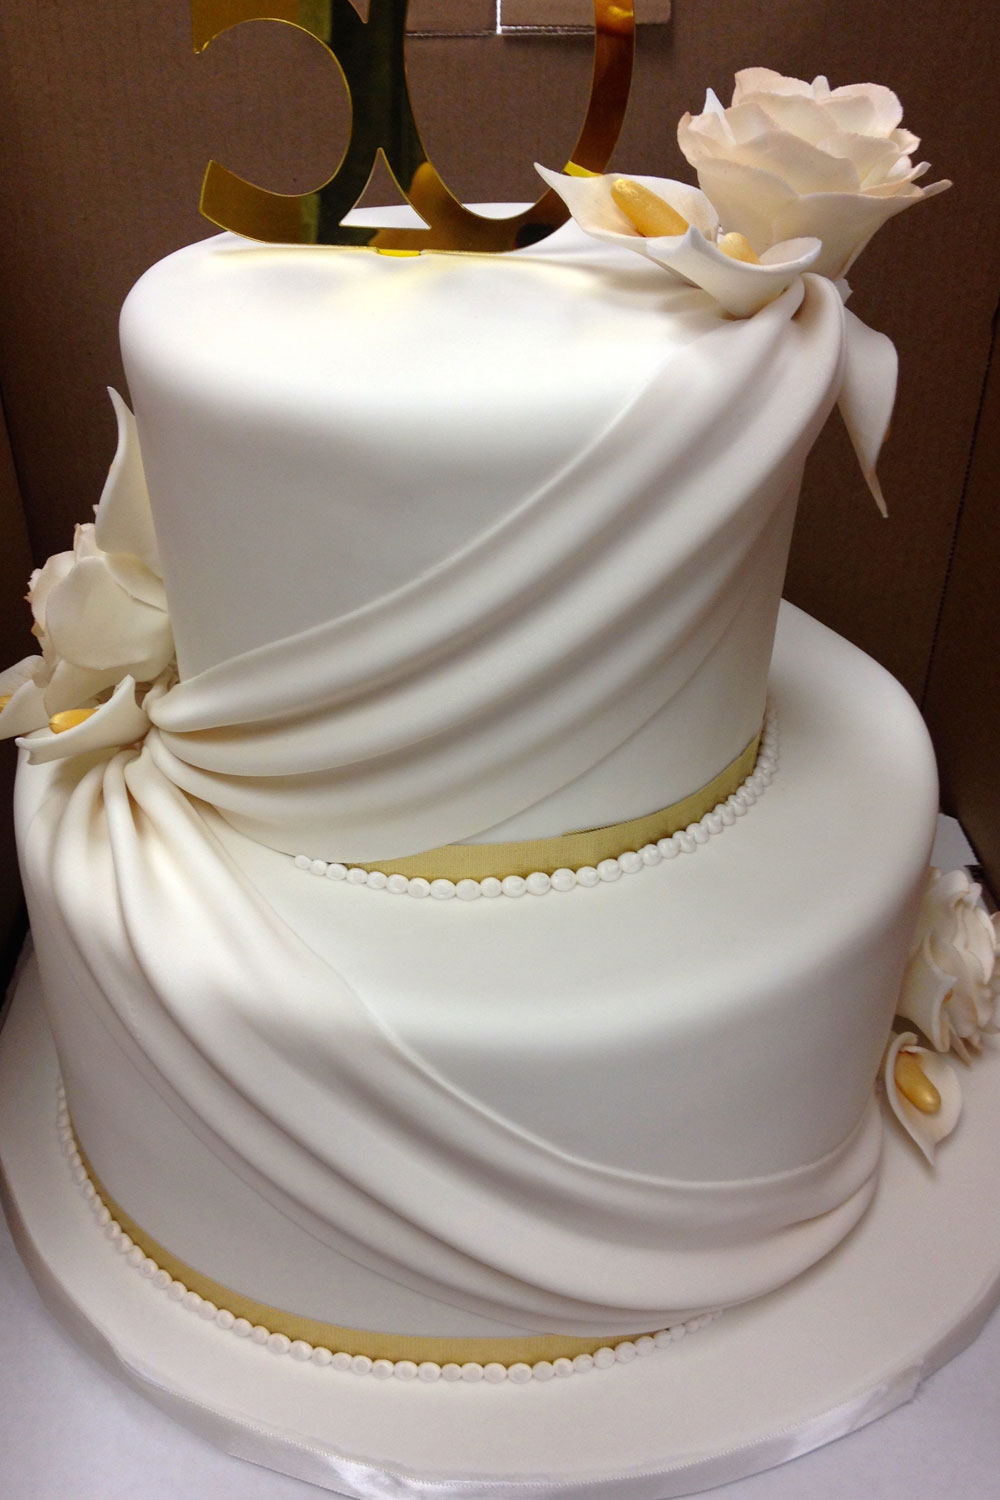 Wedding cake with Angled Drapes with Flower Clusters